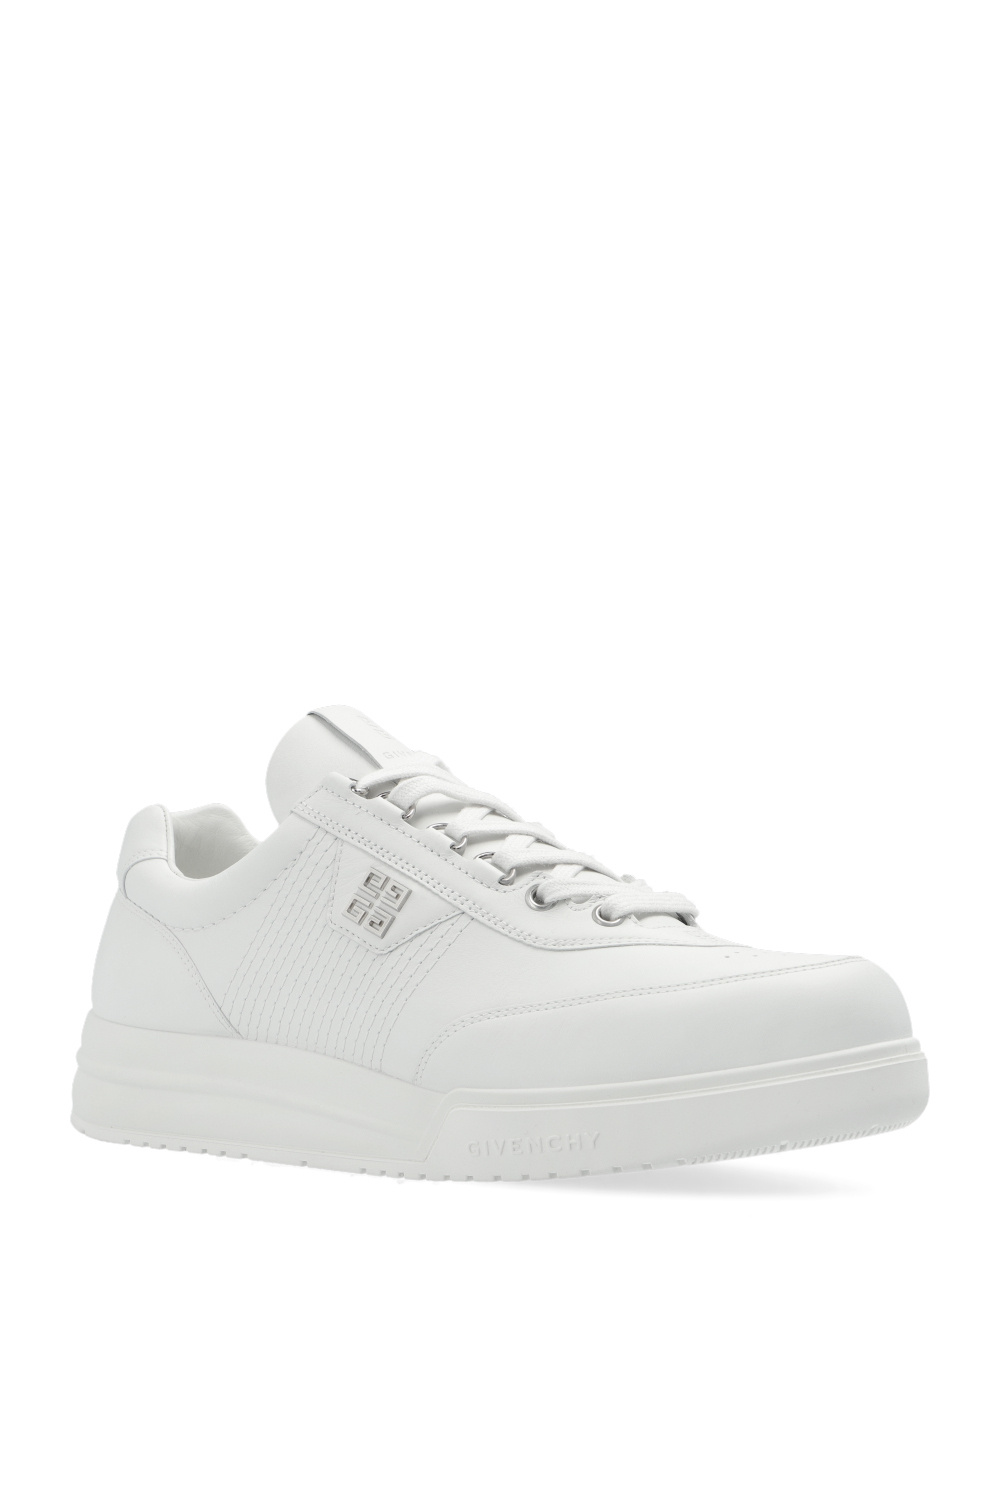 givenchy amp ‘G4’ sneakers